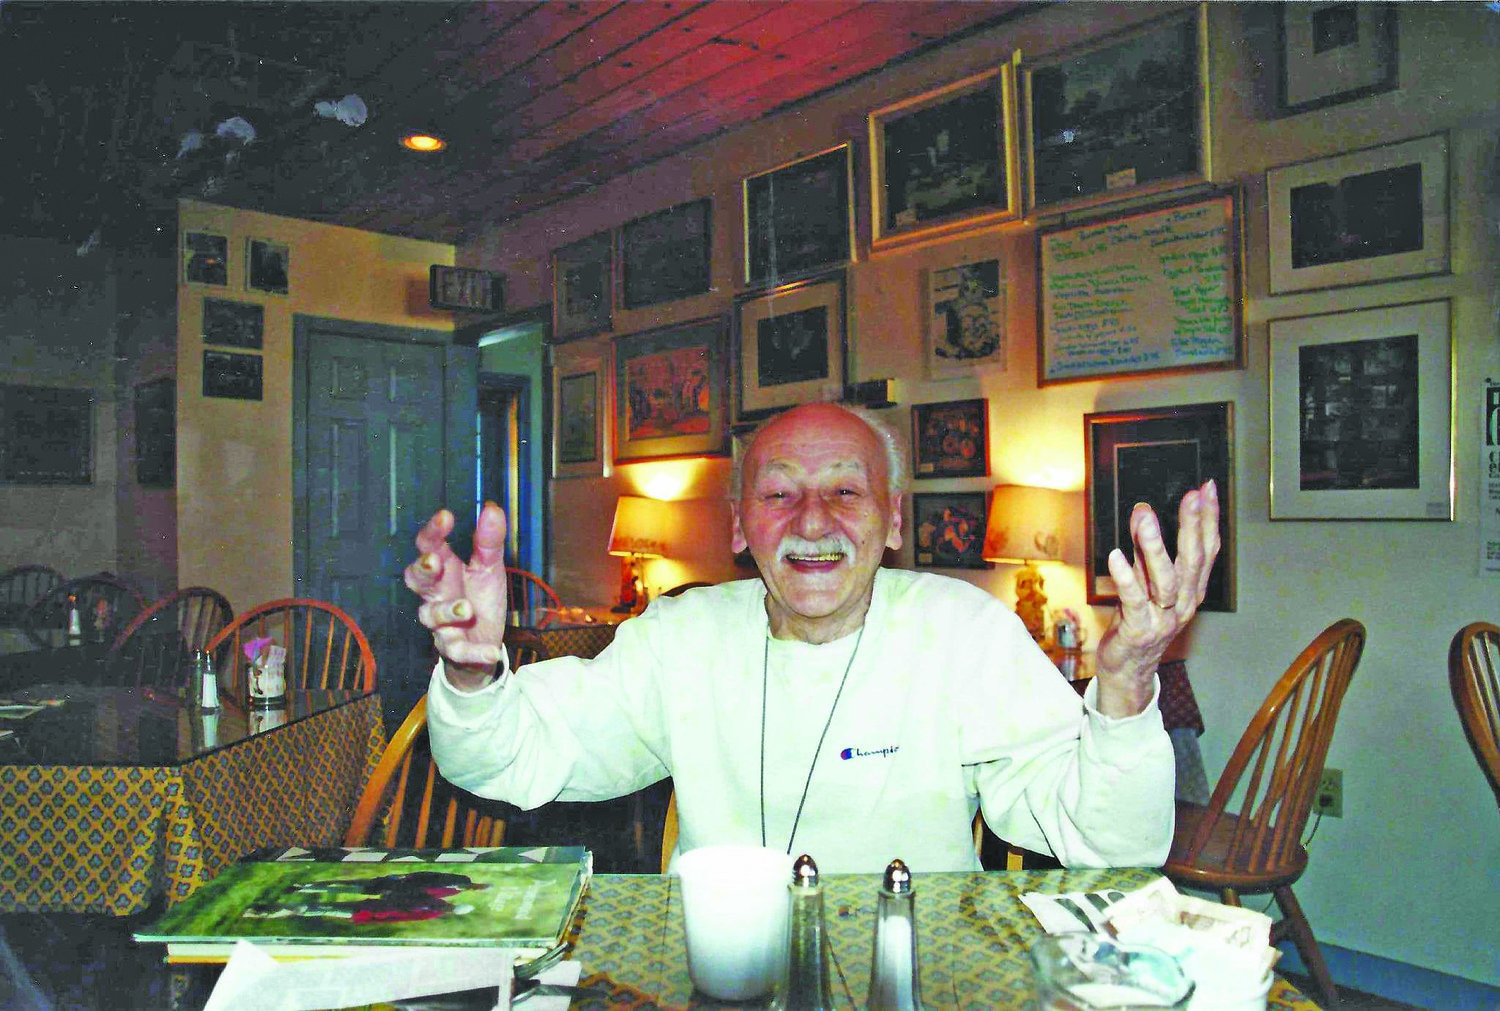 Jack Rosen was a regular patron of Duck Soup, a breakfast and lunch restaurant tucked away in the Logan Square Shopping Center on Route 202.